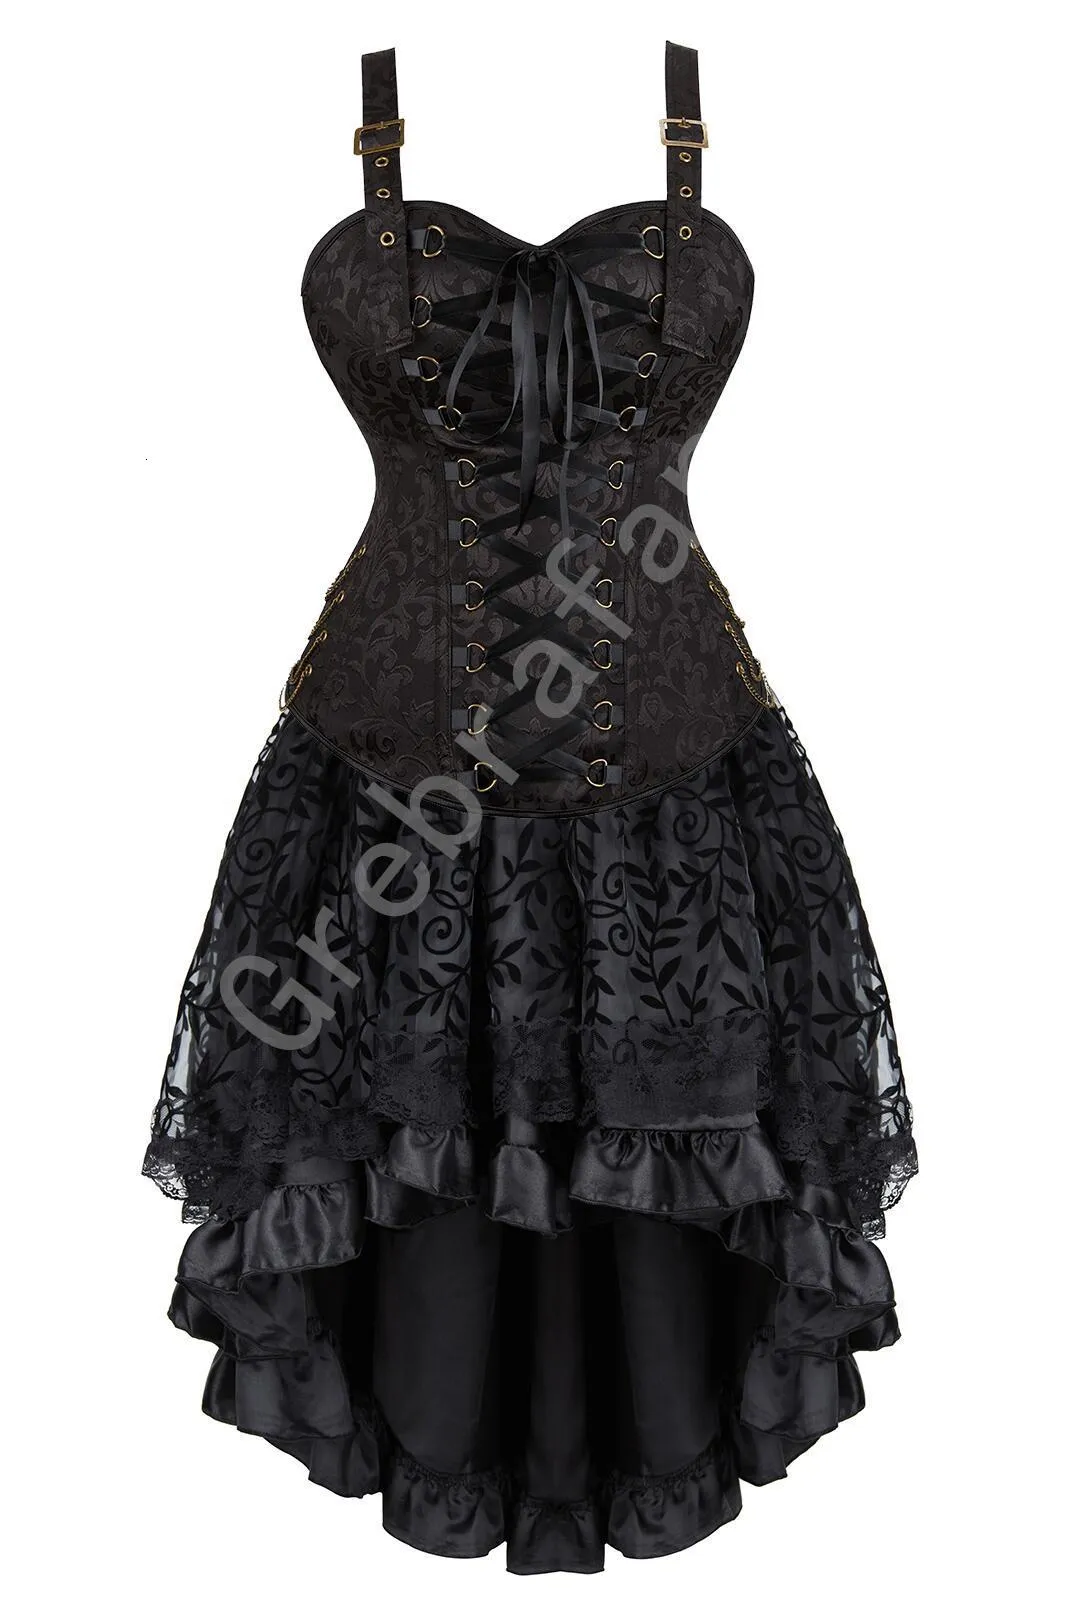 Vintage Gothic Sunzel Waist Corset Corset Dress For Women Plus Size Pirate  Steampunk Bustier Skirt Gothic Halloween Costume Outfit 2308017 From Shu07,  $31.89